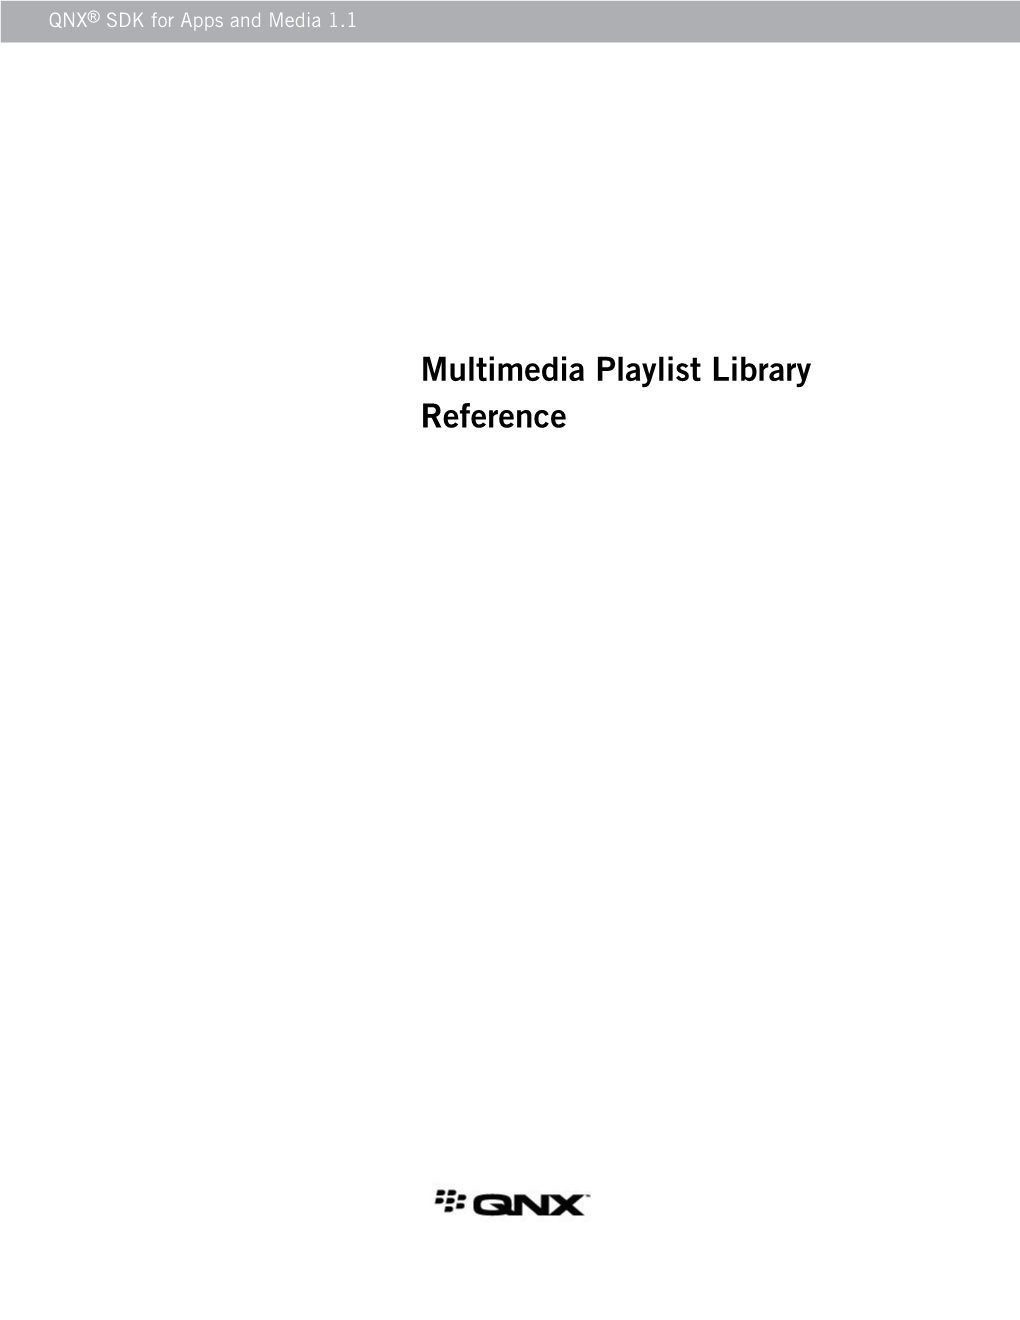 Multimedia Playlist Library Reference ©2013–2015, QNX Software Systems Limited, a Subsidiary of Blackberry Limited